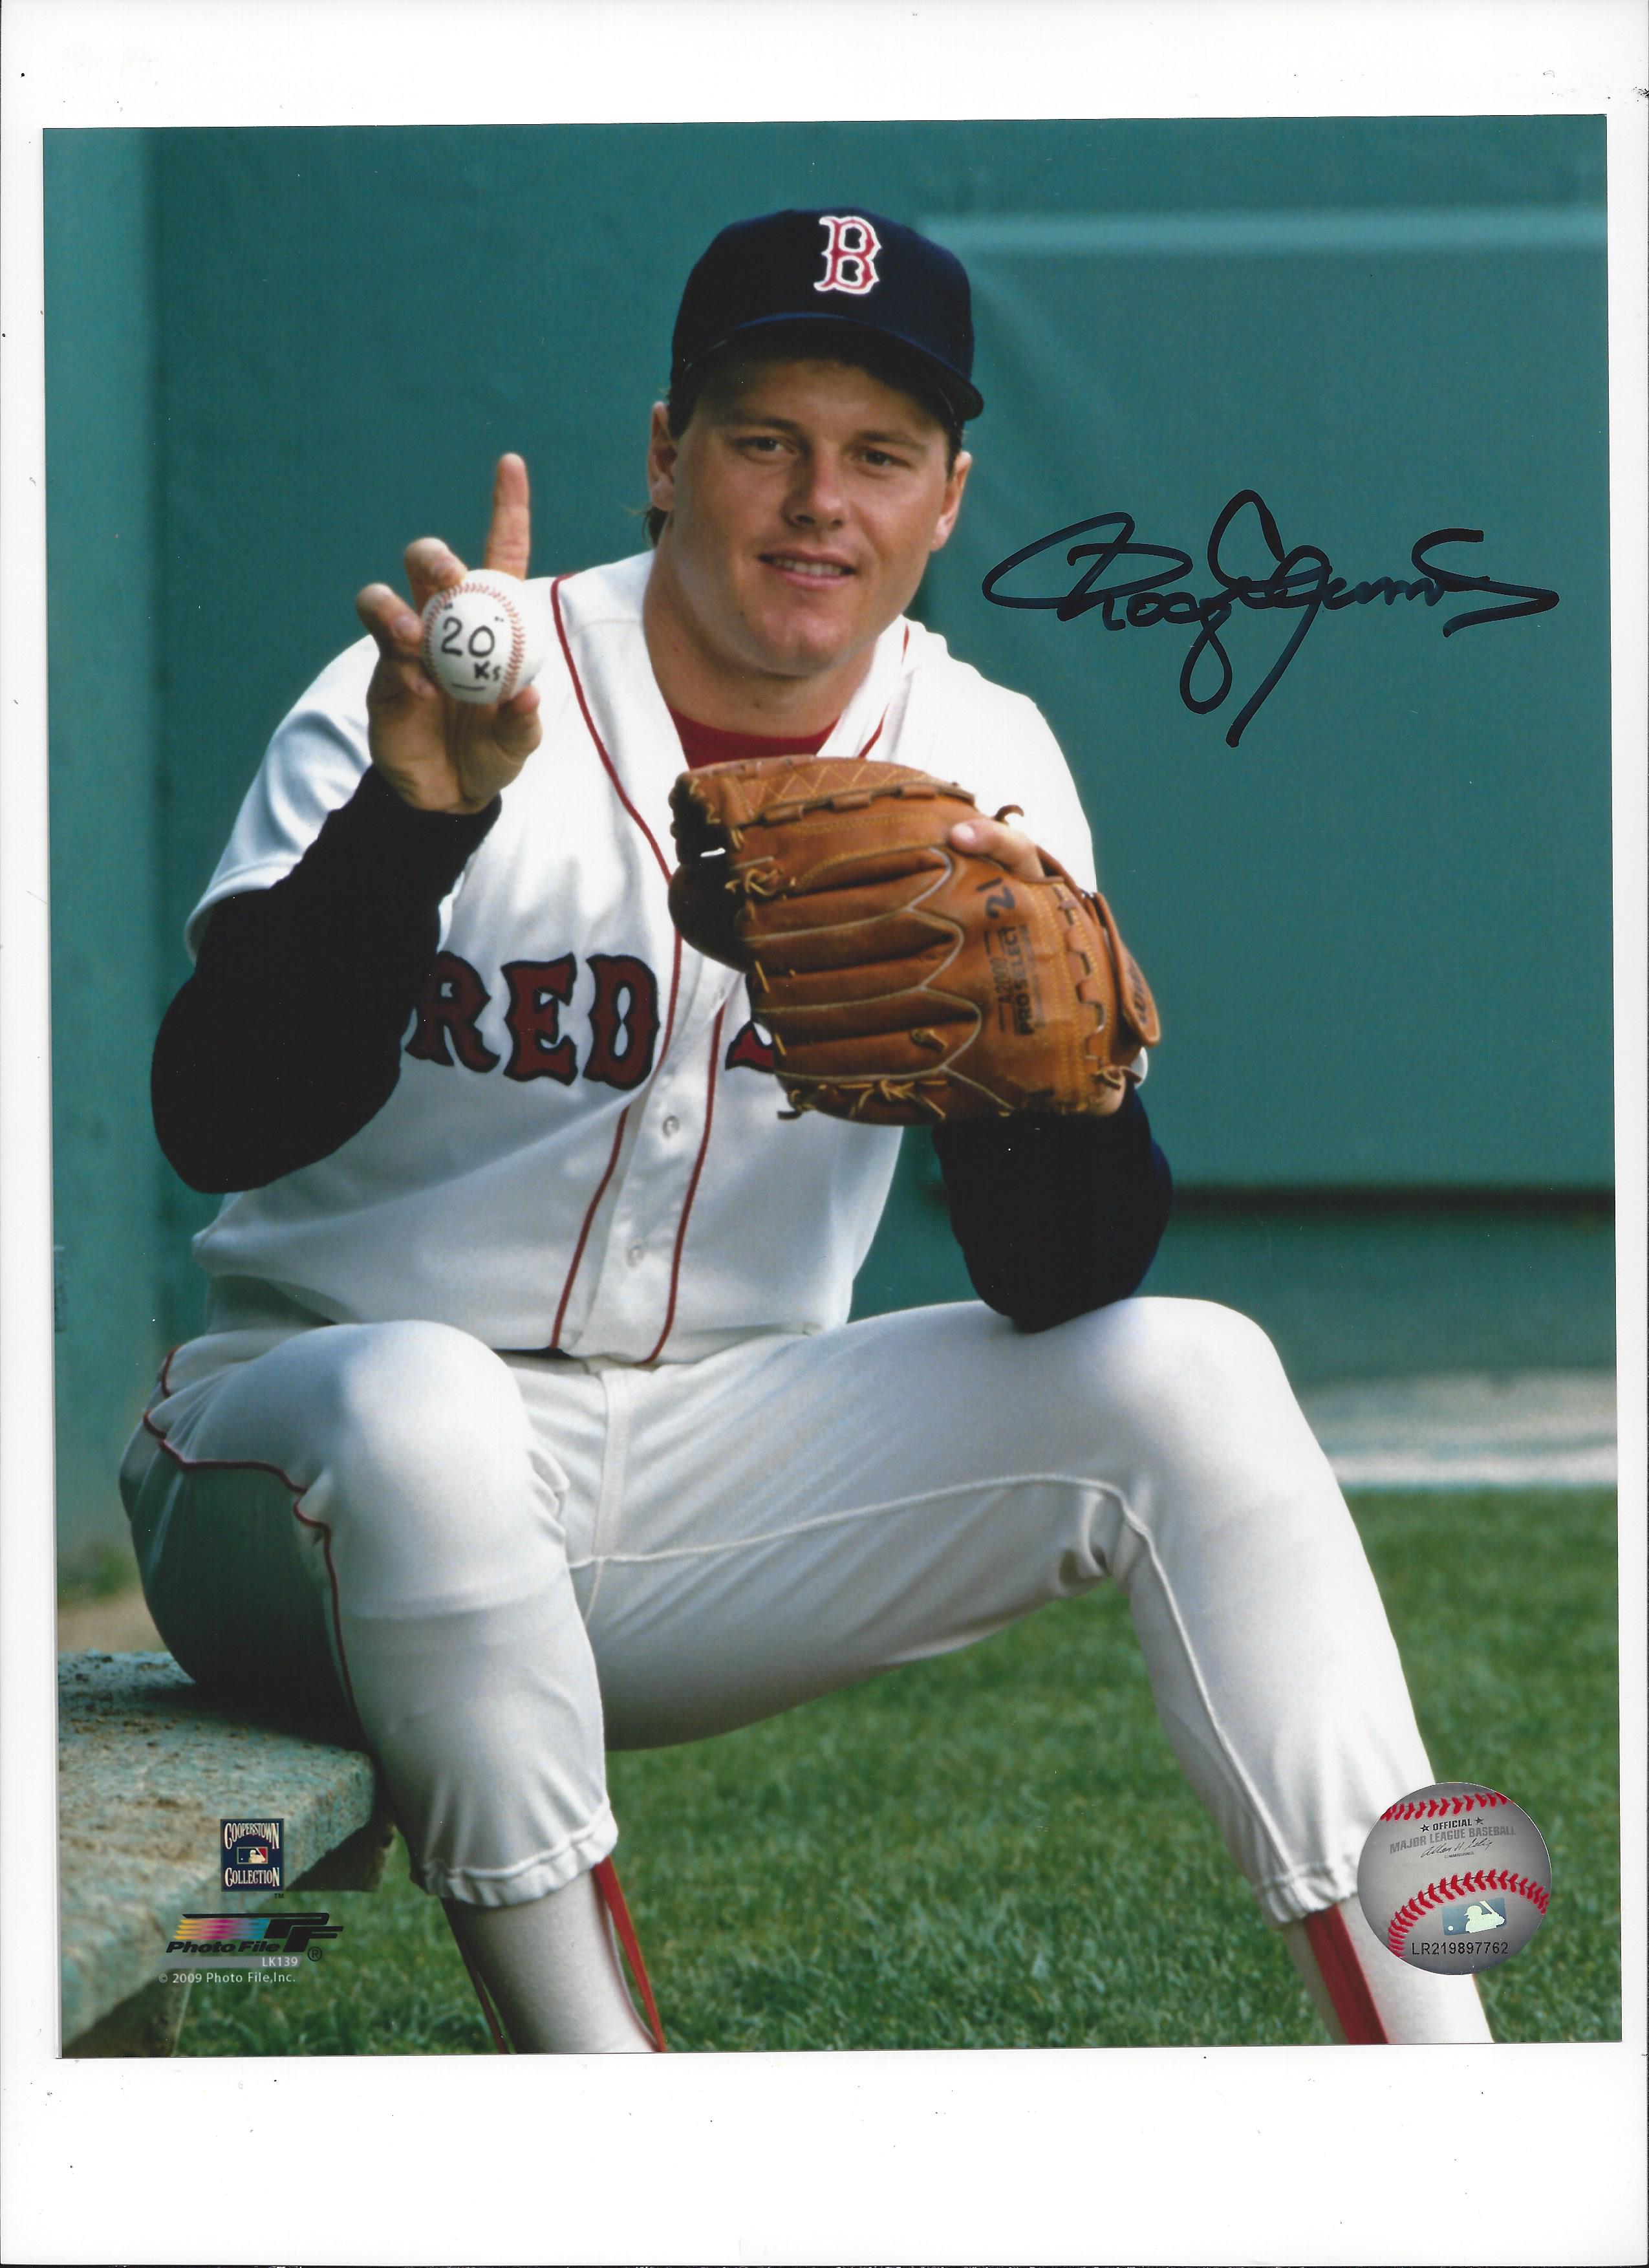 Roger Clemens Baseball Boston Red Sox Vintage Sports Photos for